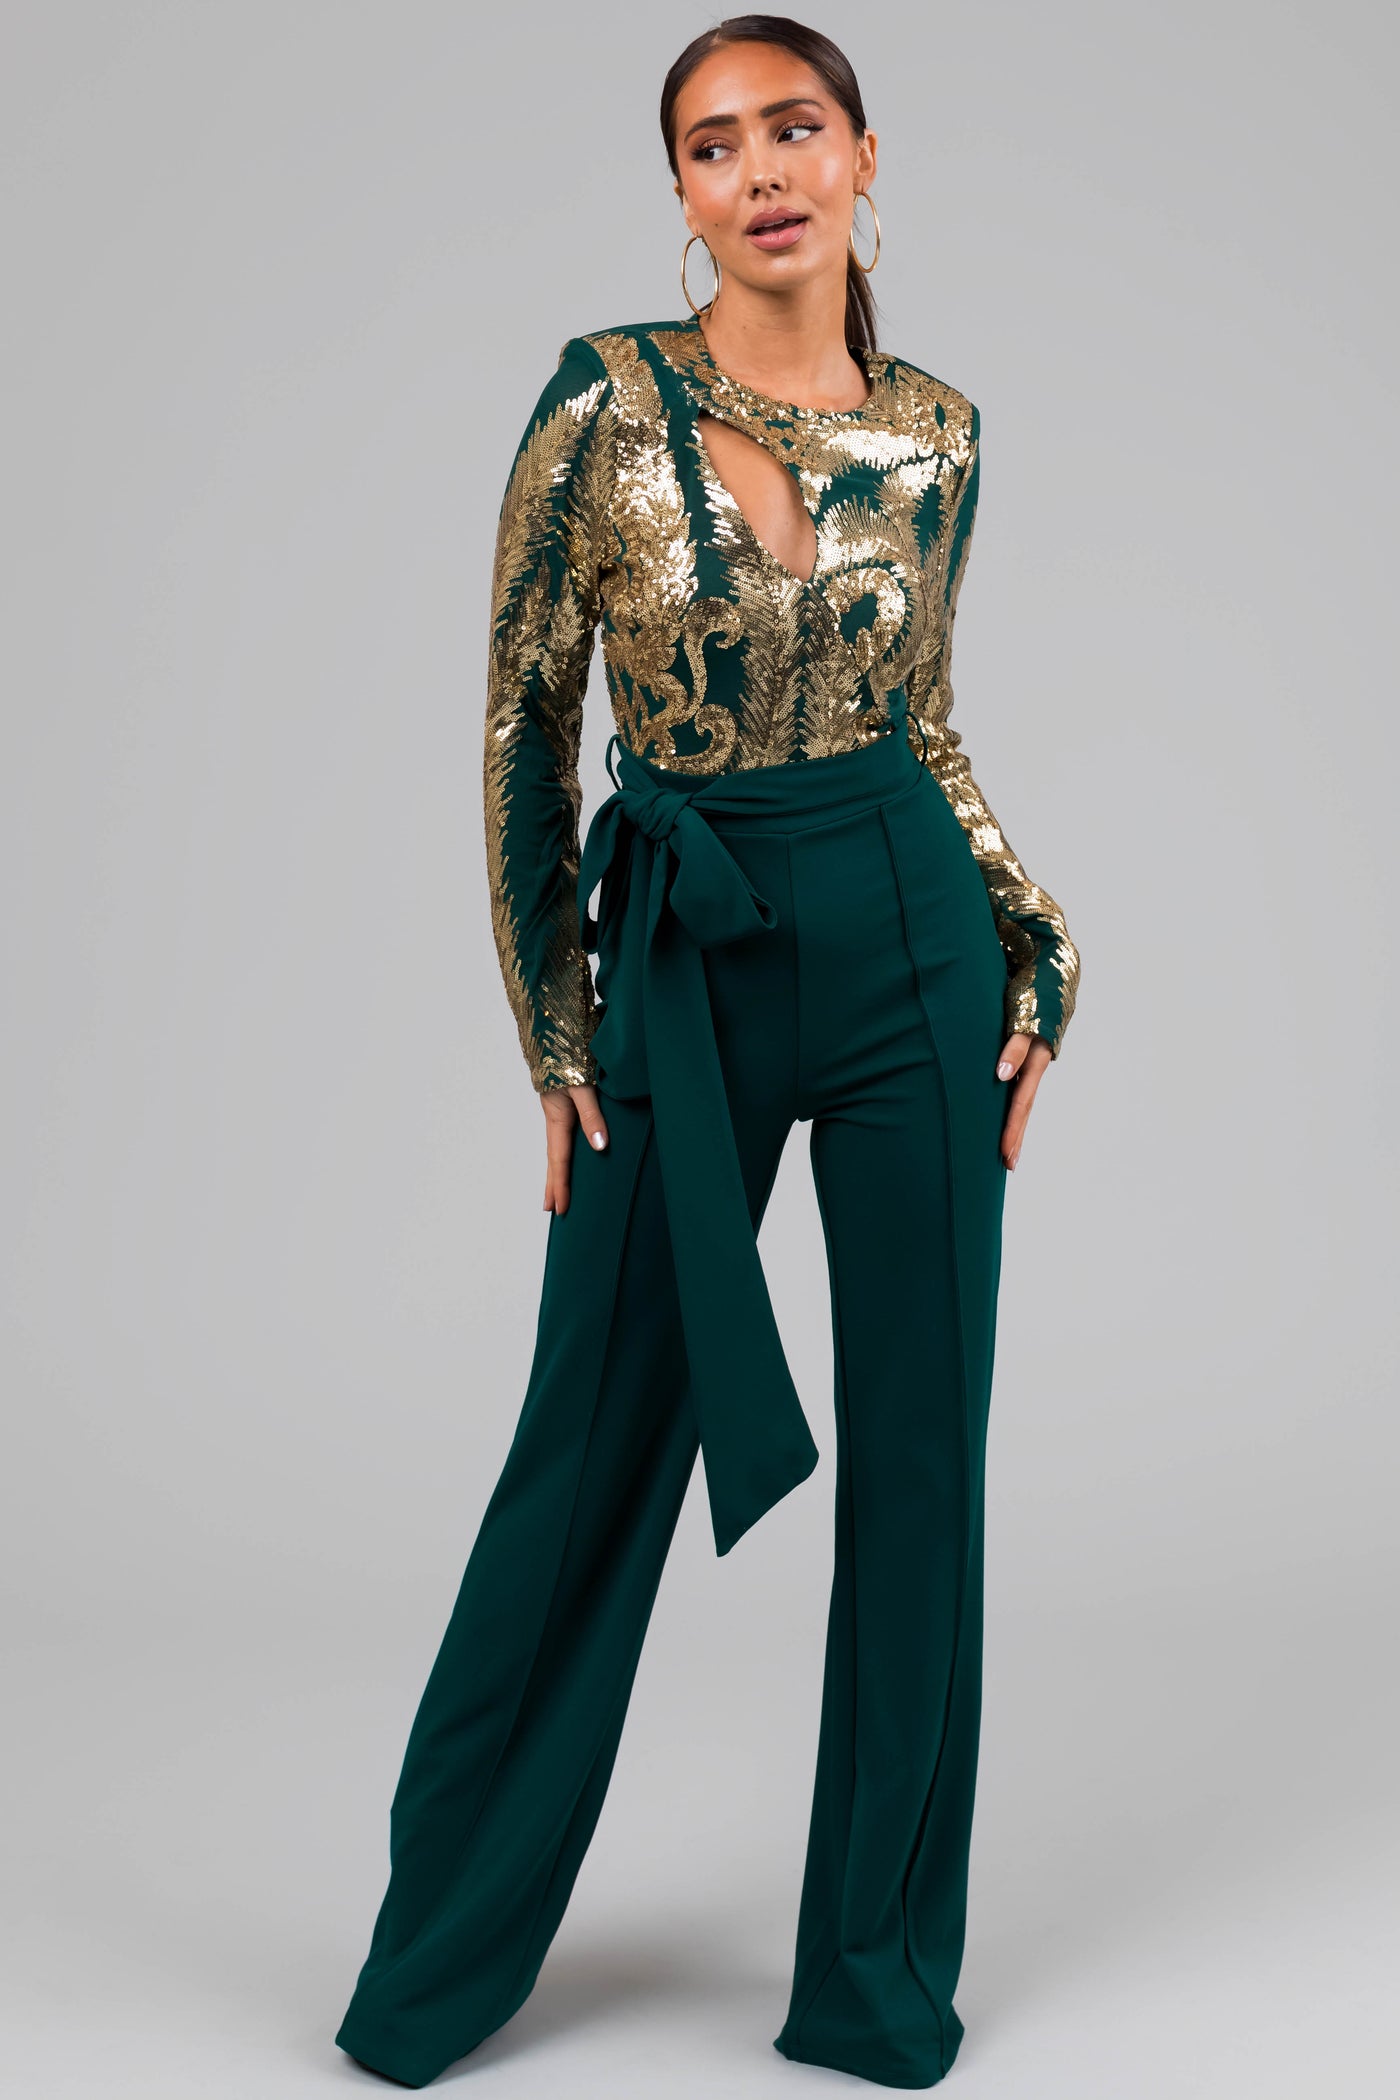 Hunter Green and Gold Sequin Print Jumpsuit